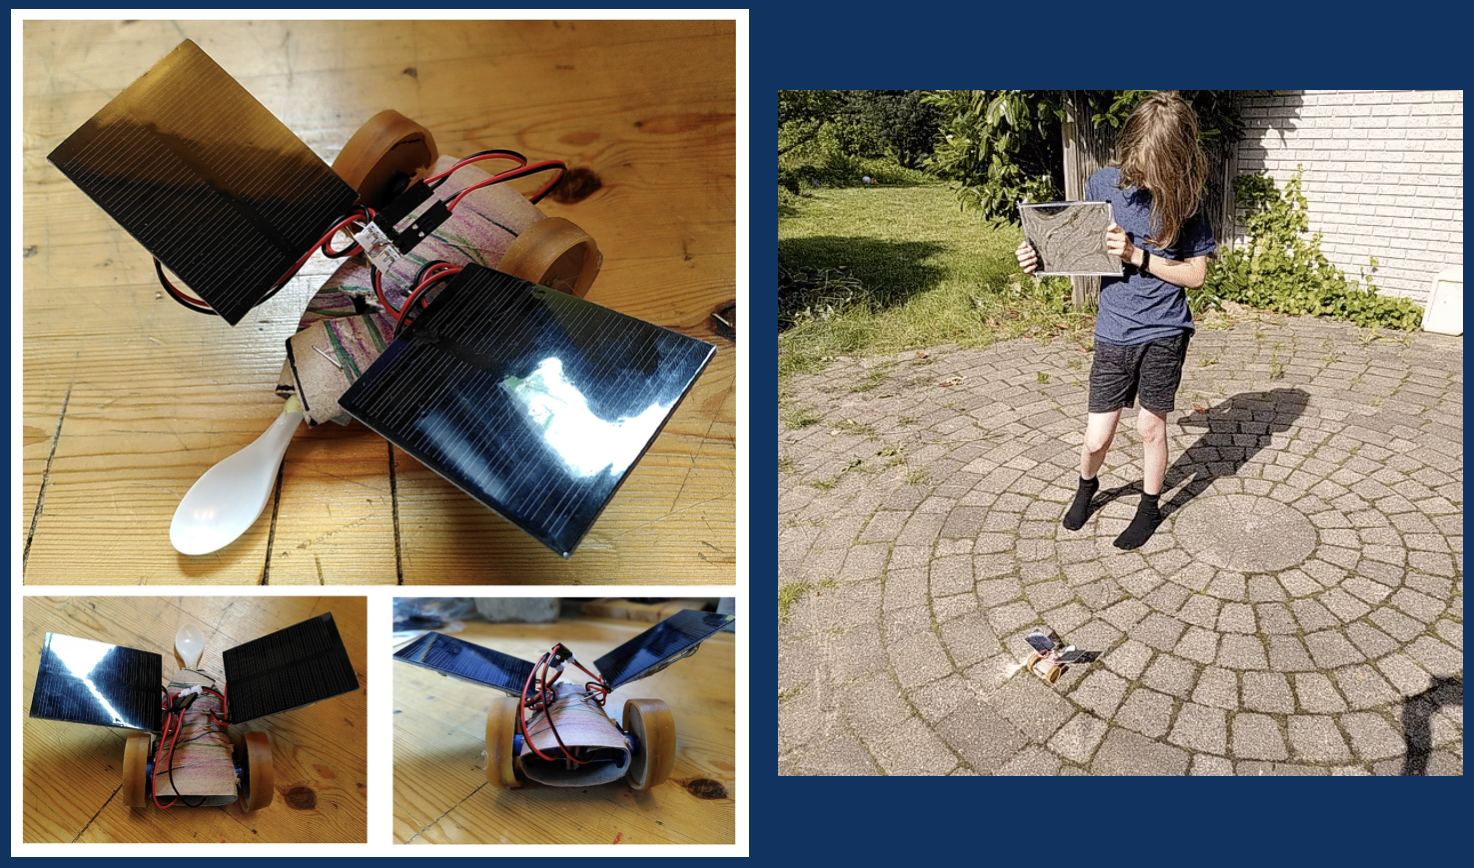 The first solar bug consisting of a cardboard tube and two .5 watt solar panels attached to gear motors on opposite sides. It can be steered by reflecting light onto one or the other solar panels using a mirror.